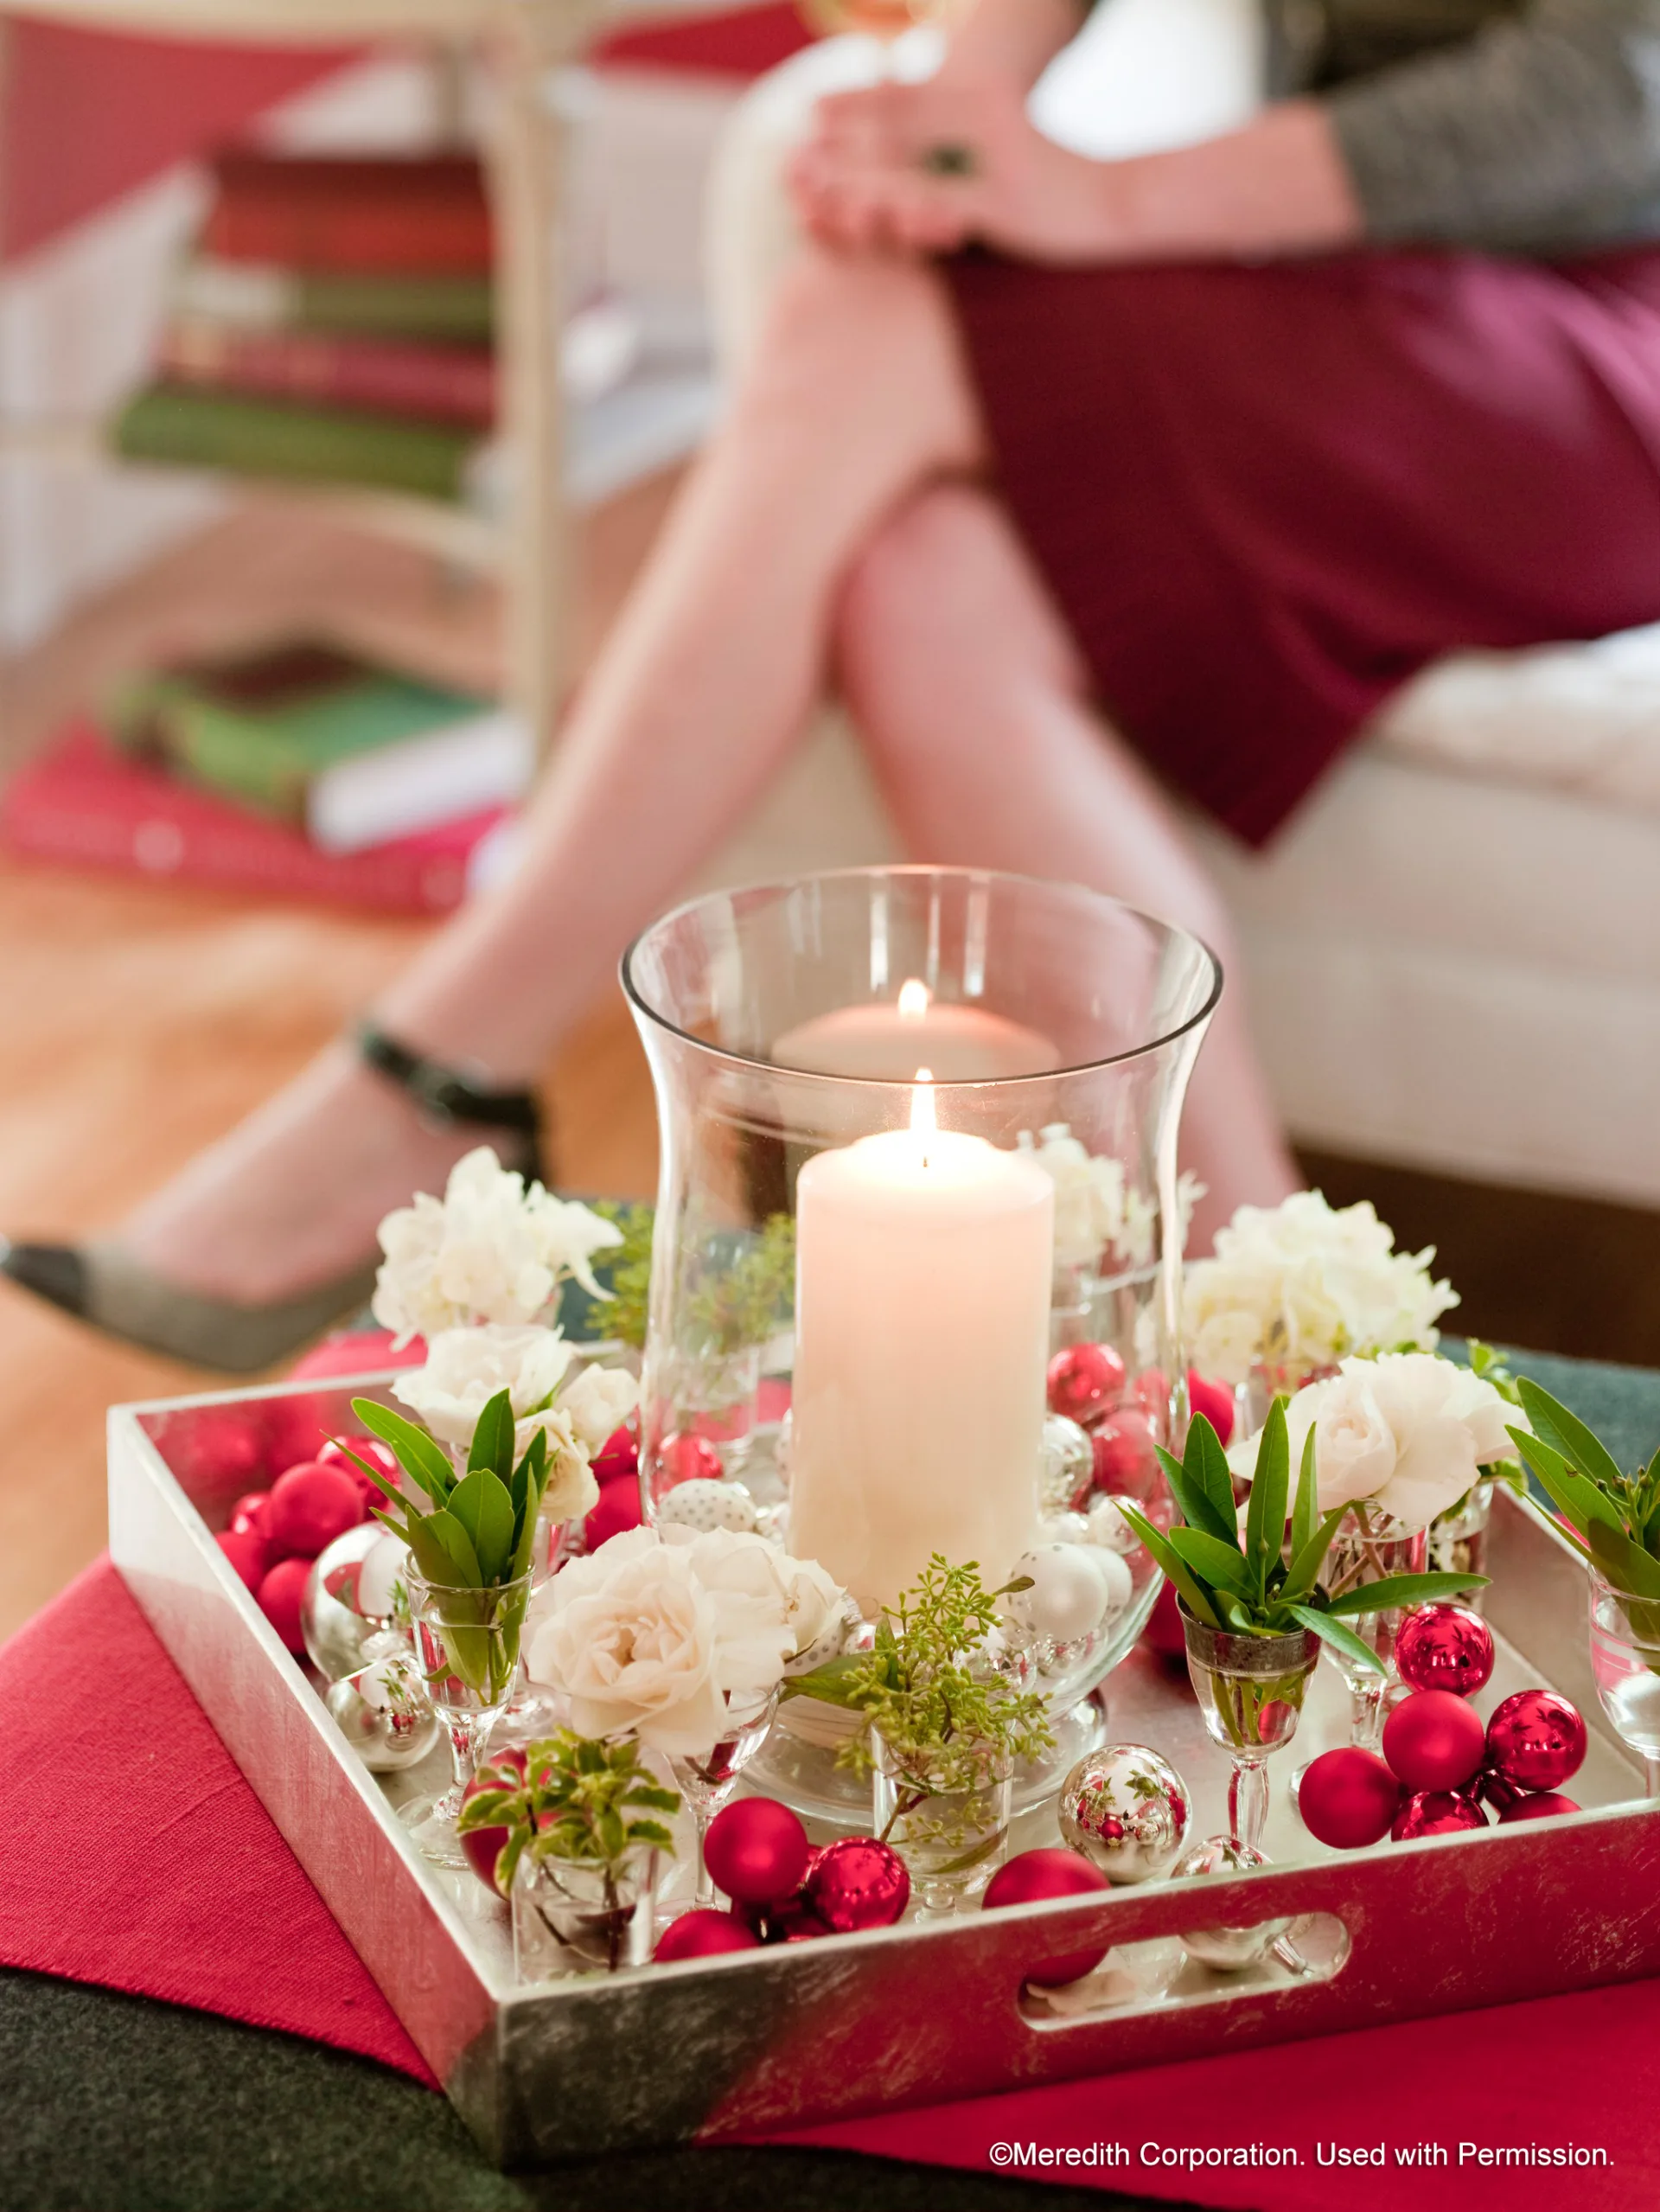 Ten Unique Ways to Incorporate Floral Into Your Holiday Décor